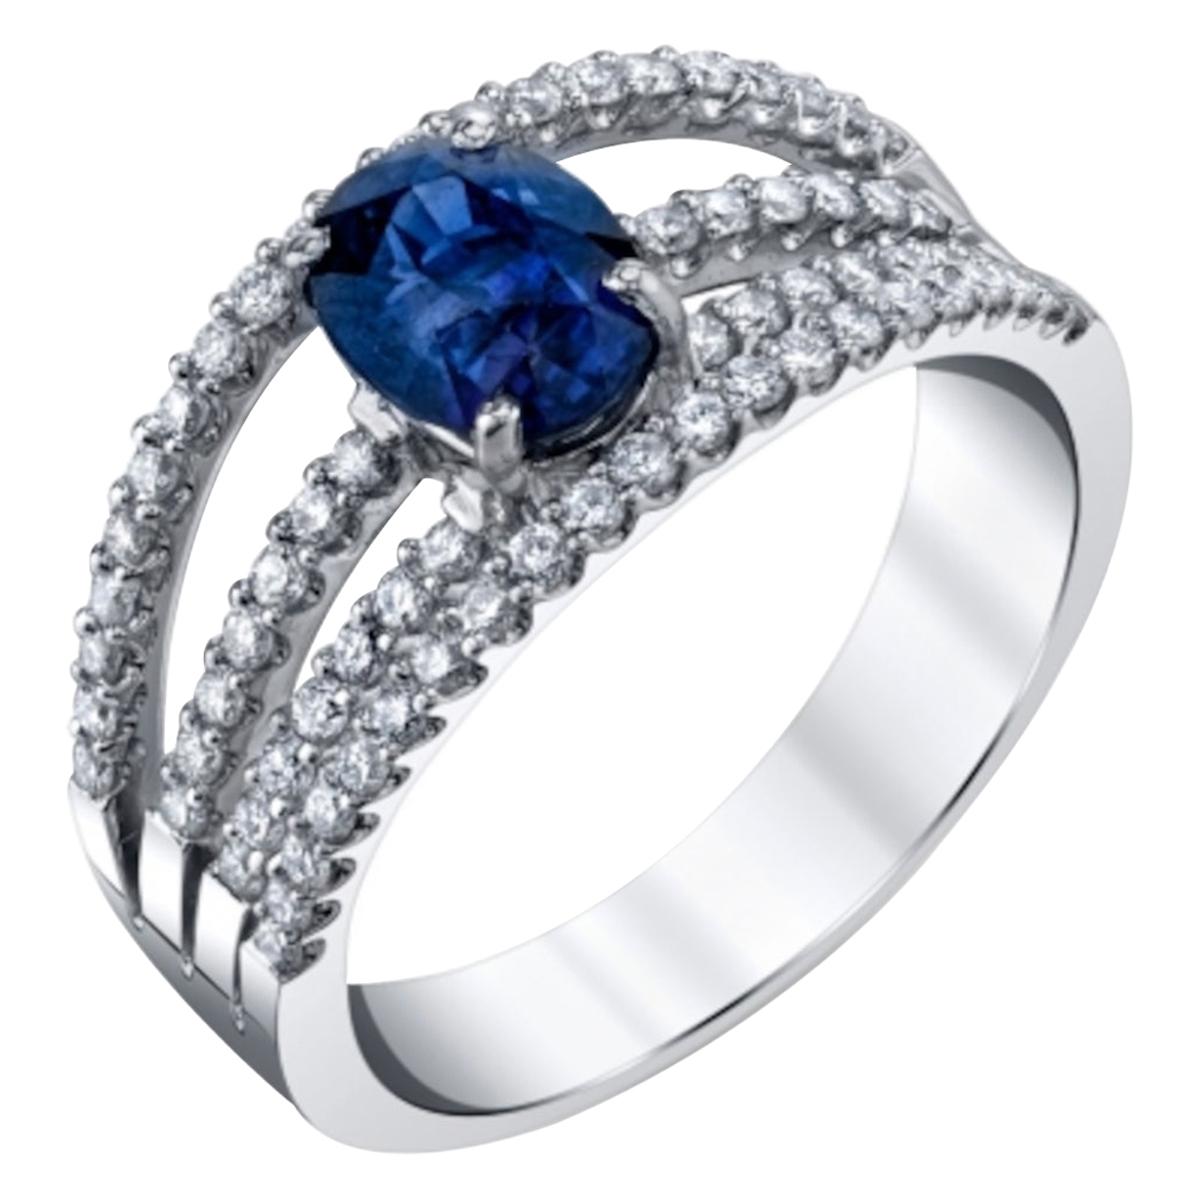 Royal Blue Sapphire and 4-Row Diamond Engagement Ring in White Gold, 1.56 Carat 